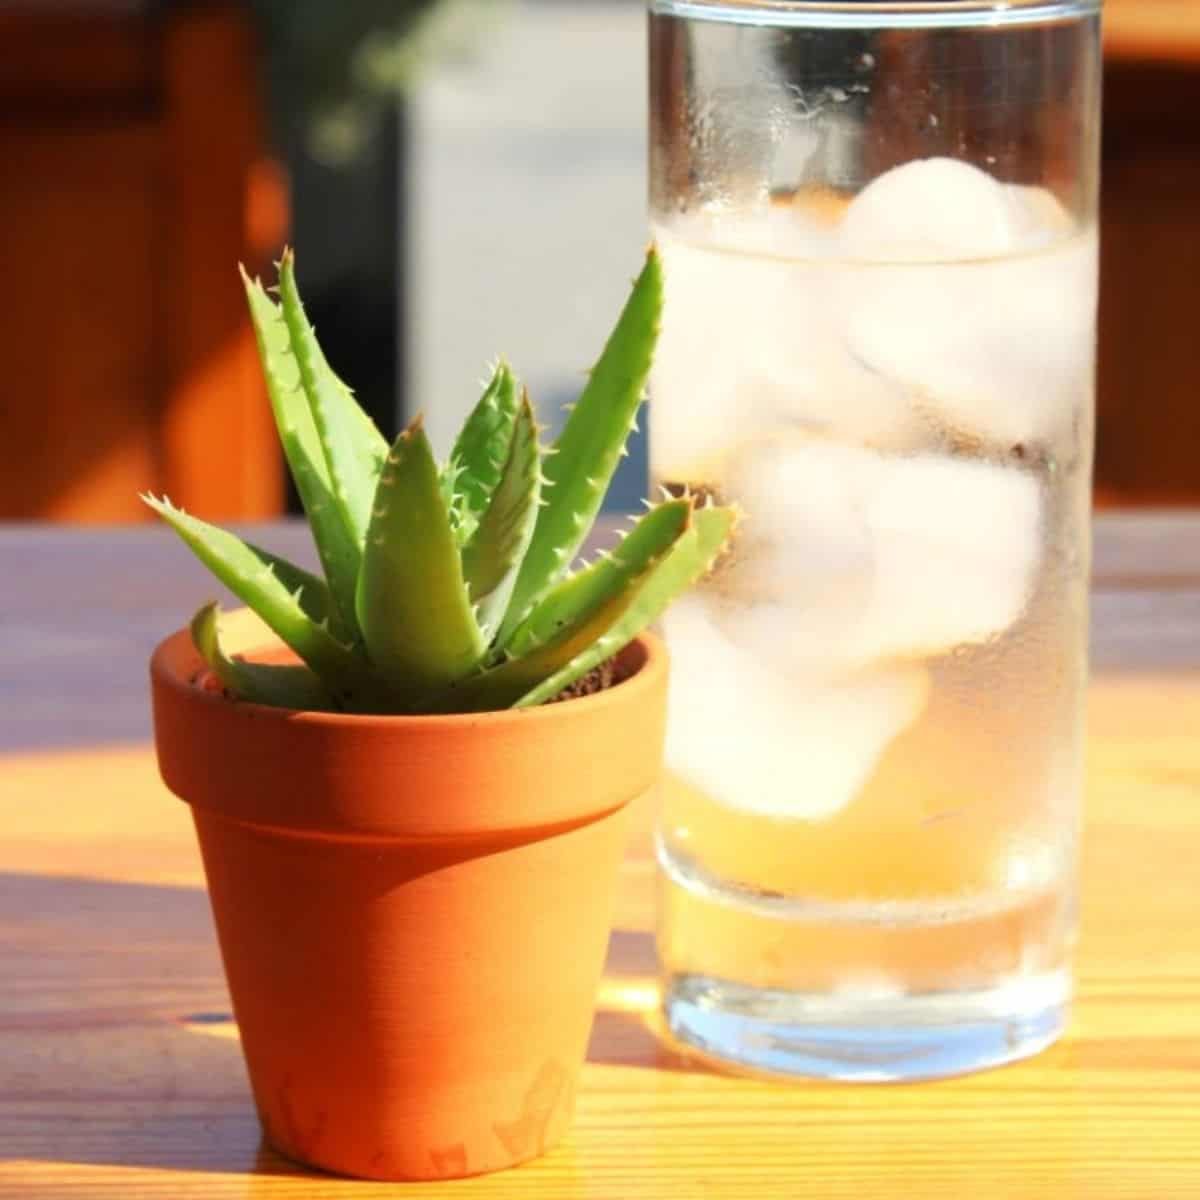 Succulent in a pot with ice cubes in glass cup on the table.